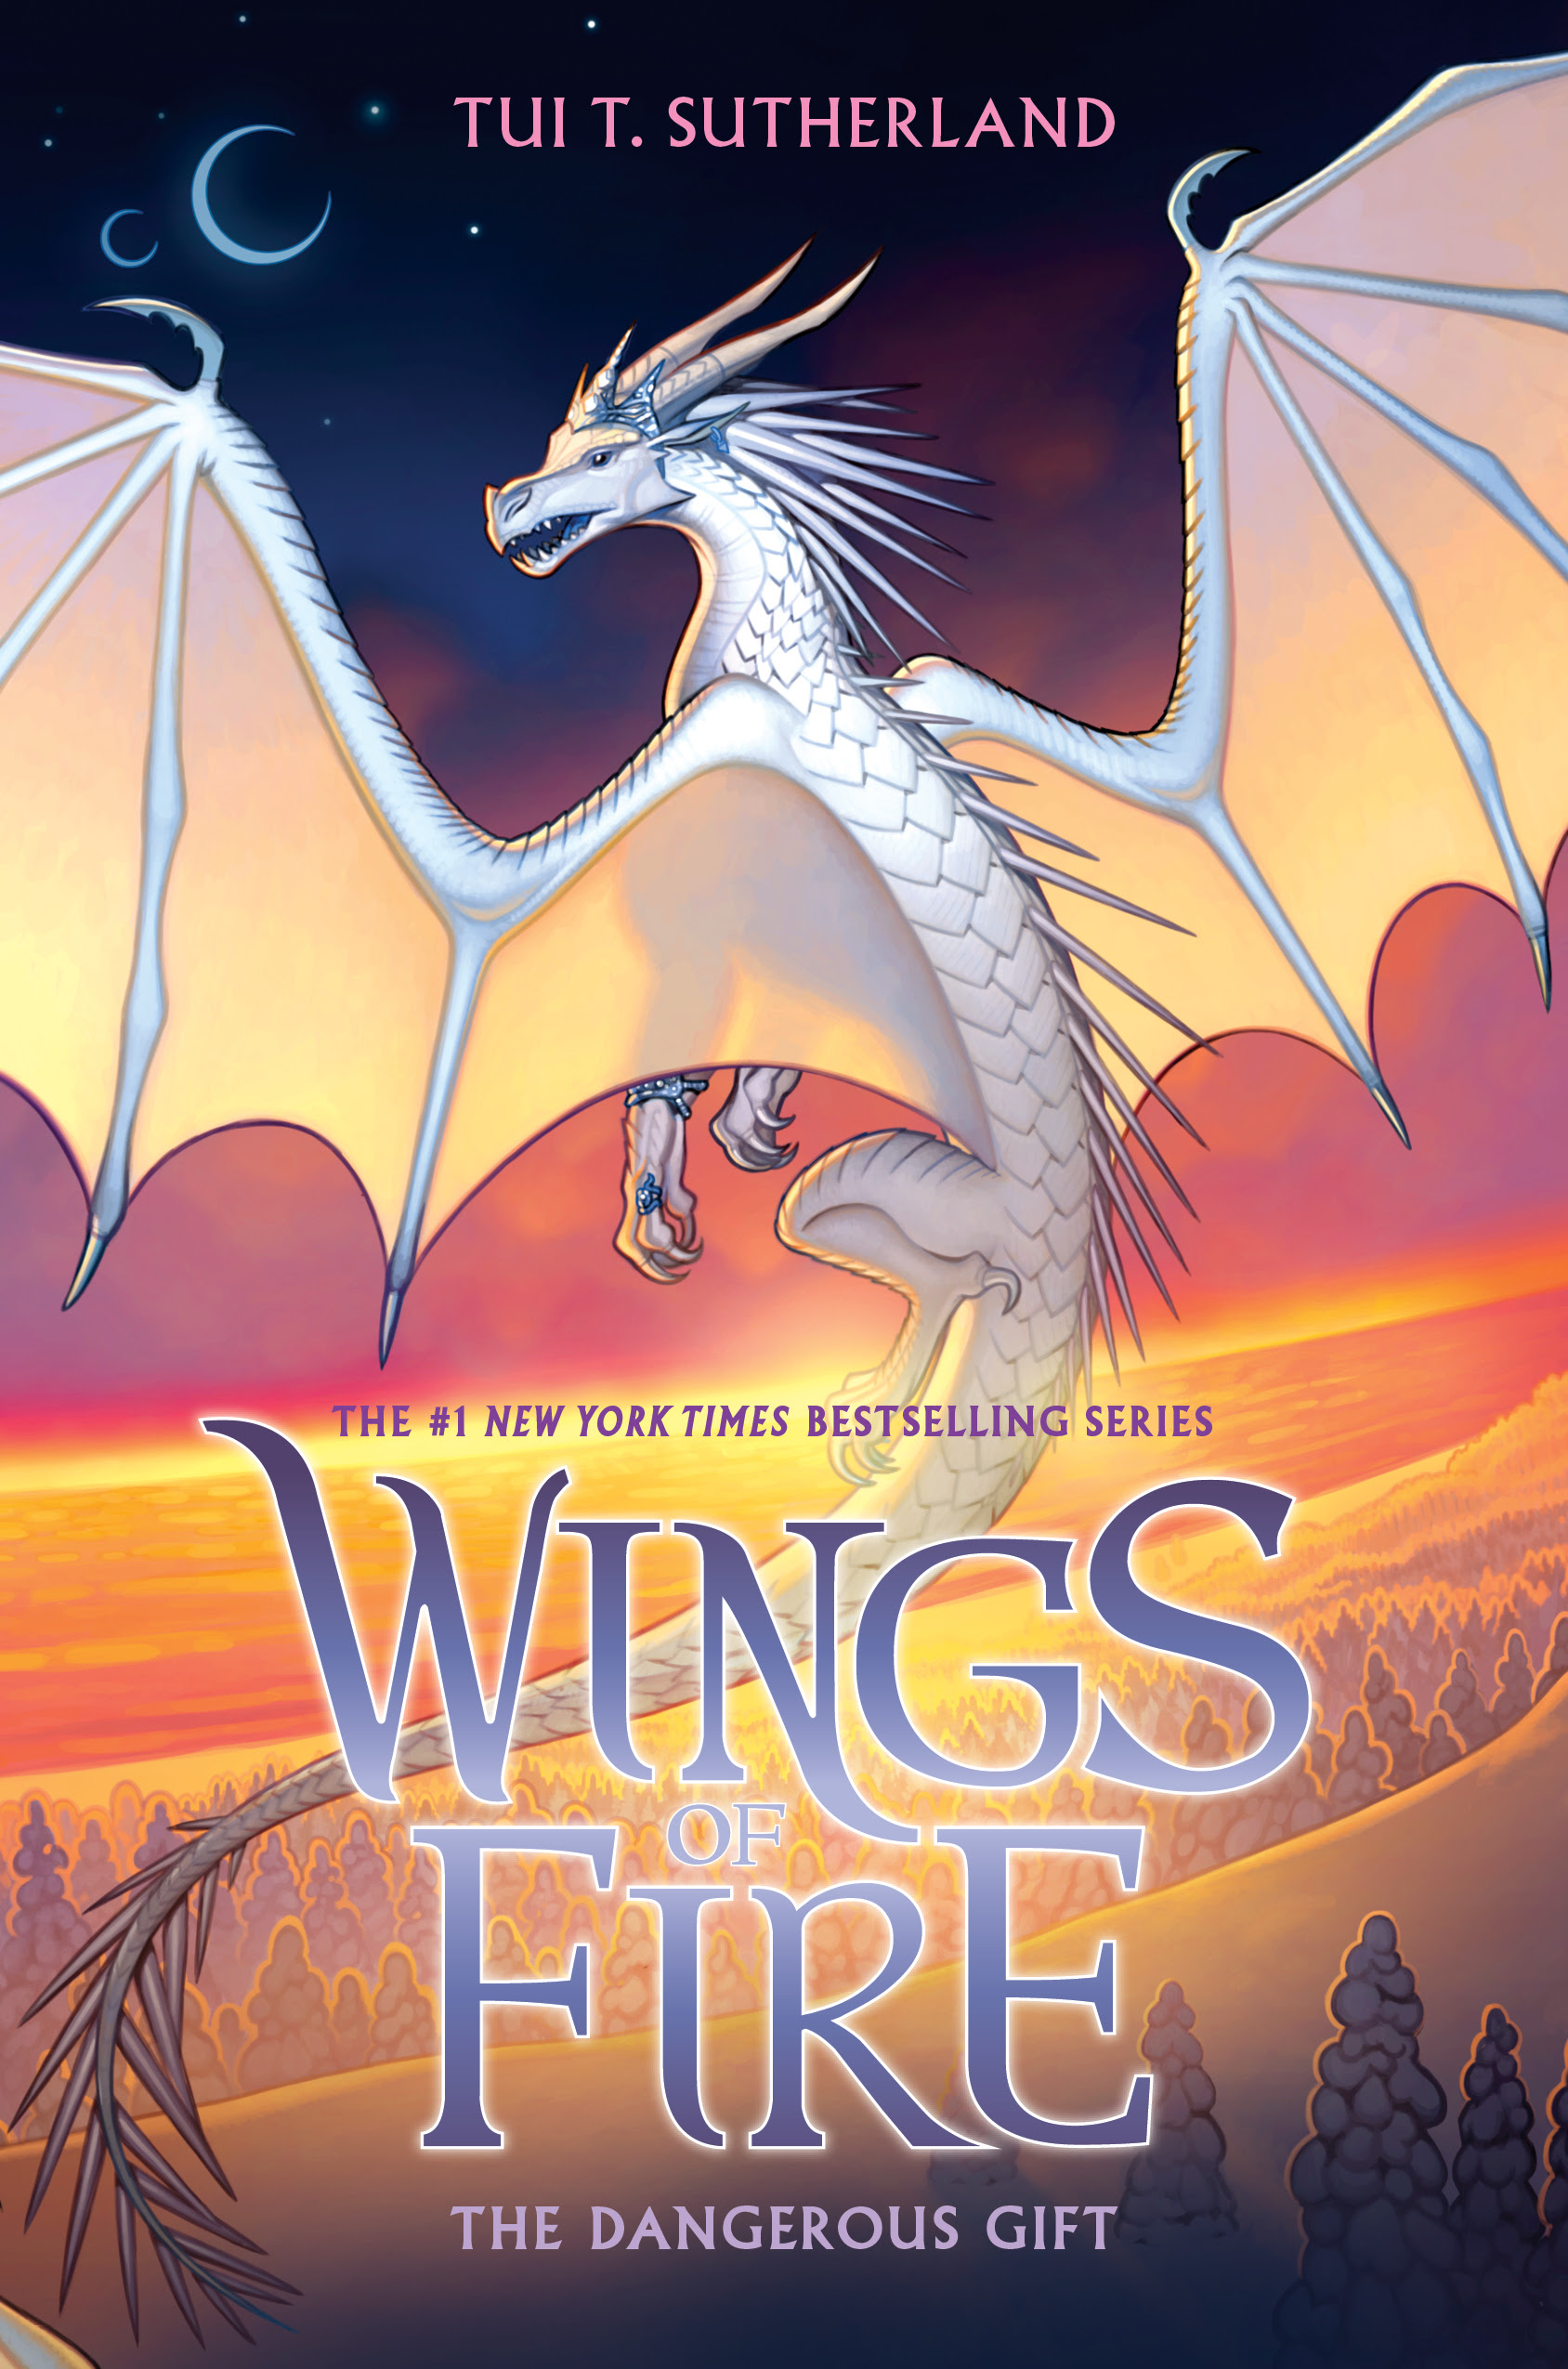 pdf download The Dangerous Gift (Wings of Fire, #14)